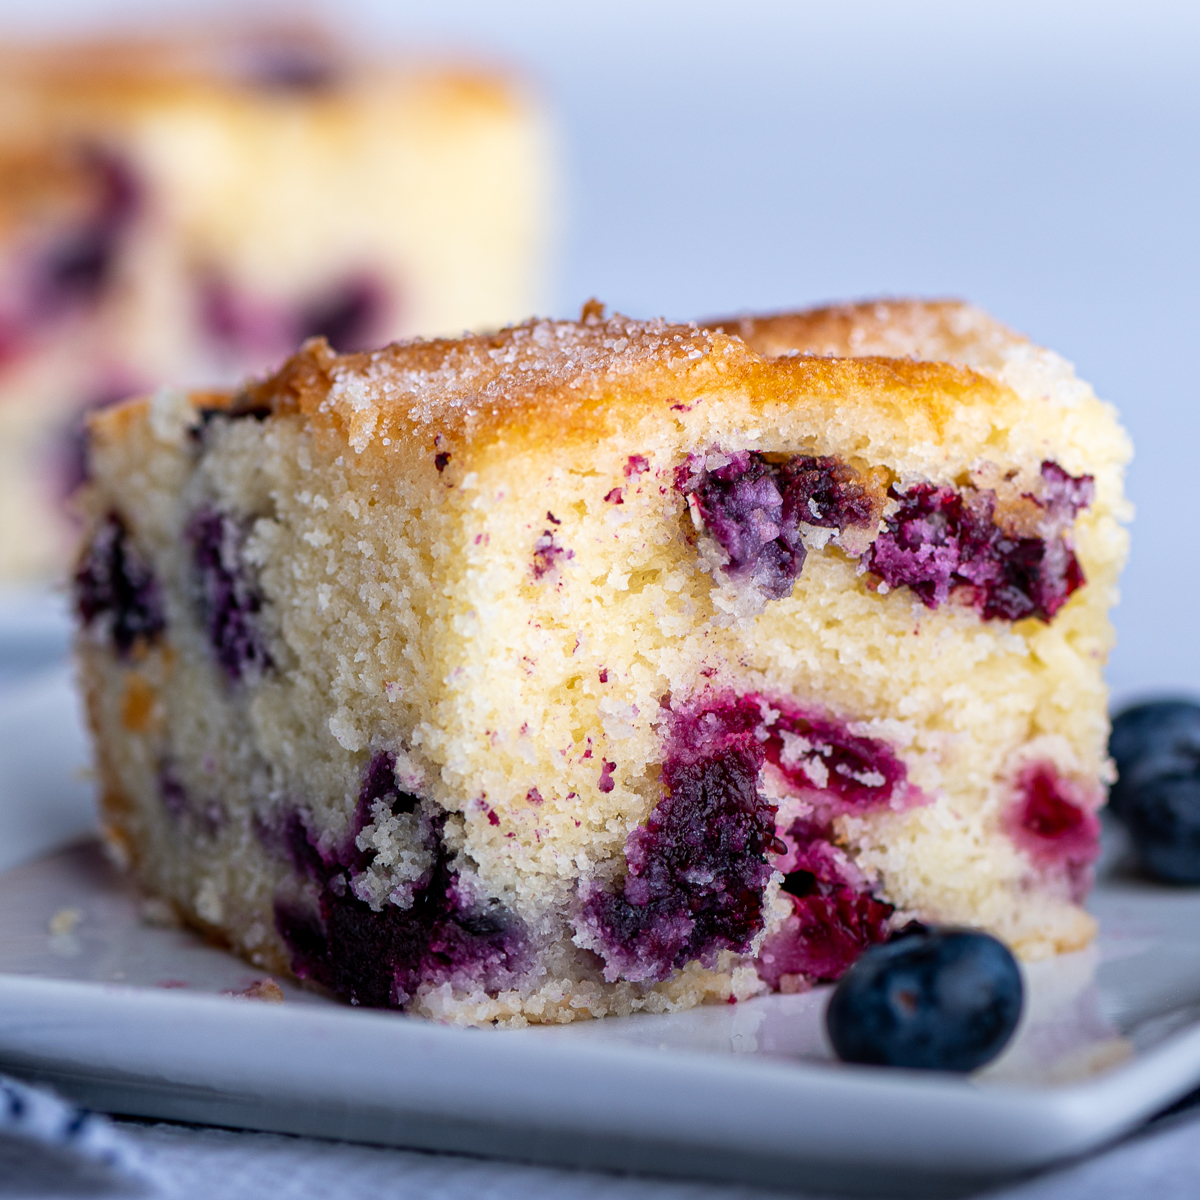 Buy Mixed Berry & Cream cake Online at Best Price | Od